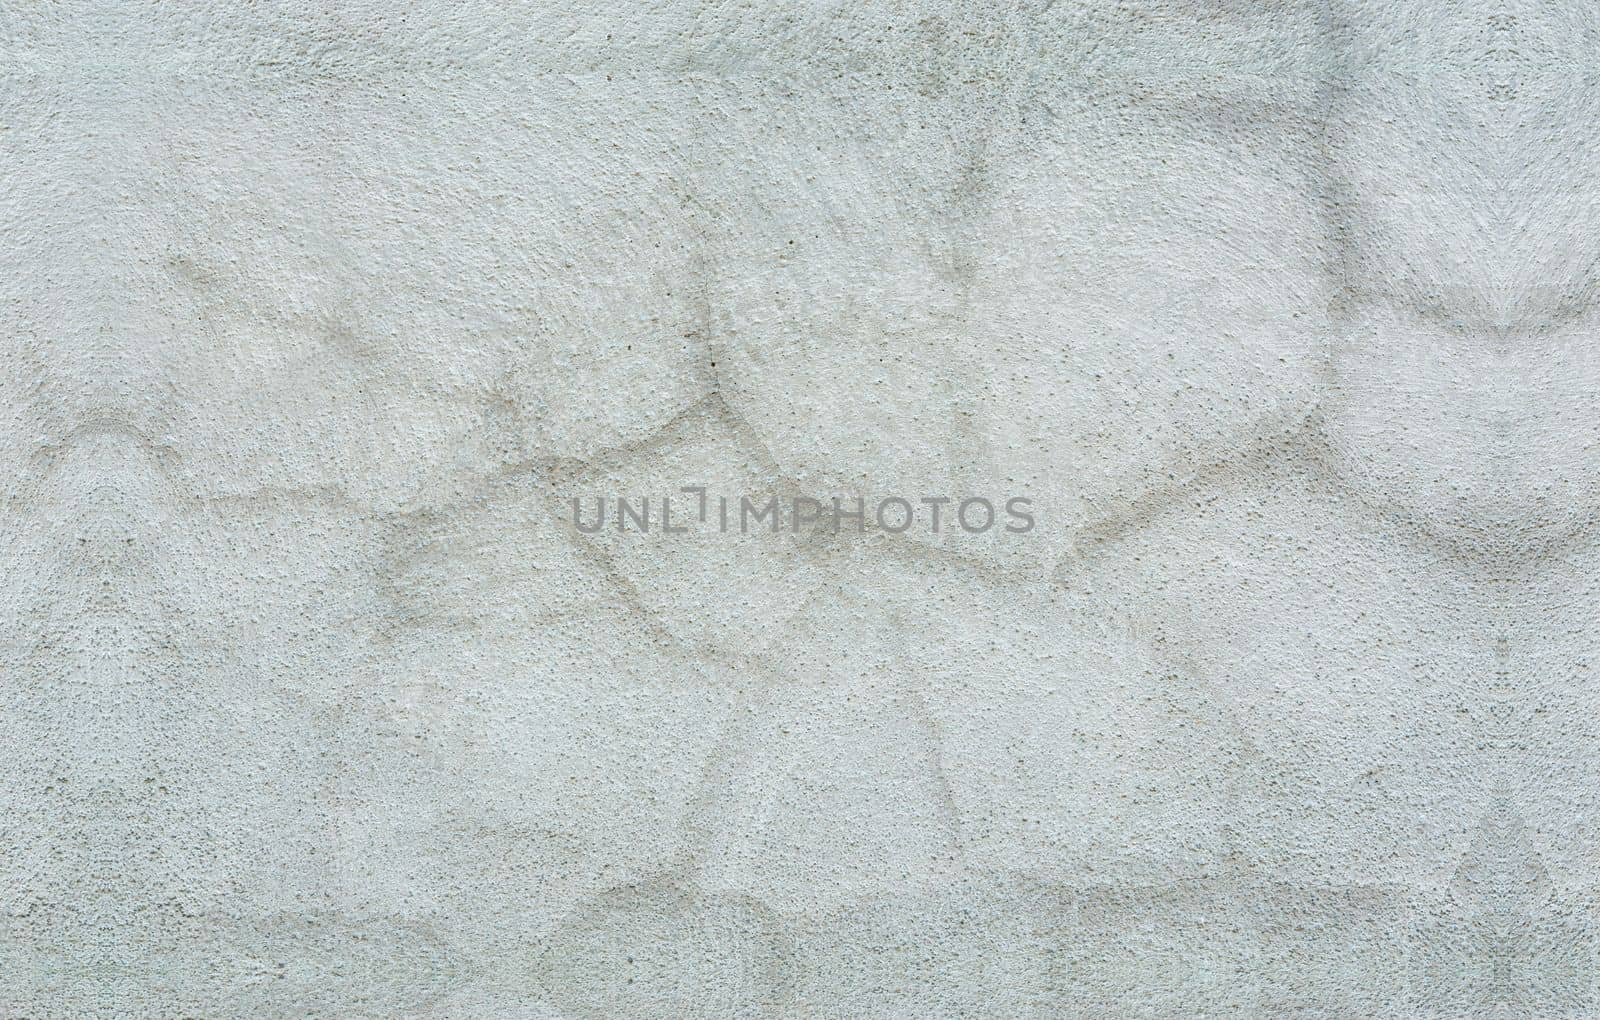 Details of a textured gray wall, Granite textured gray wall background. Texture of a gray wall. Gray wall of house with texture, Cracked gray wall background